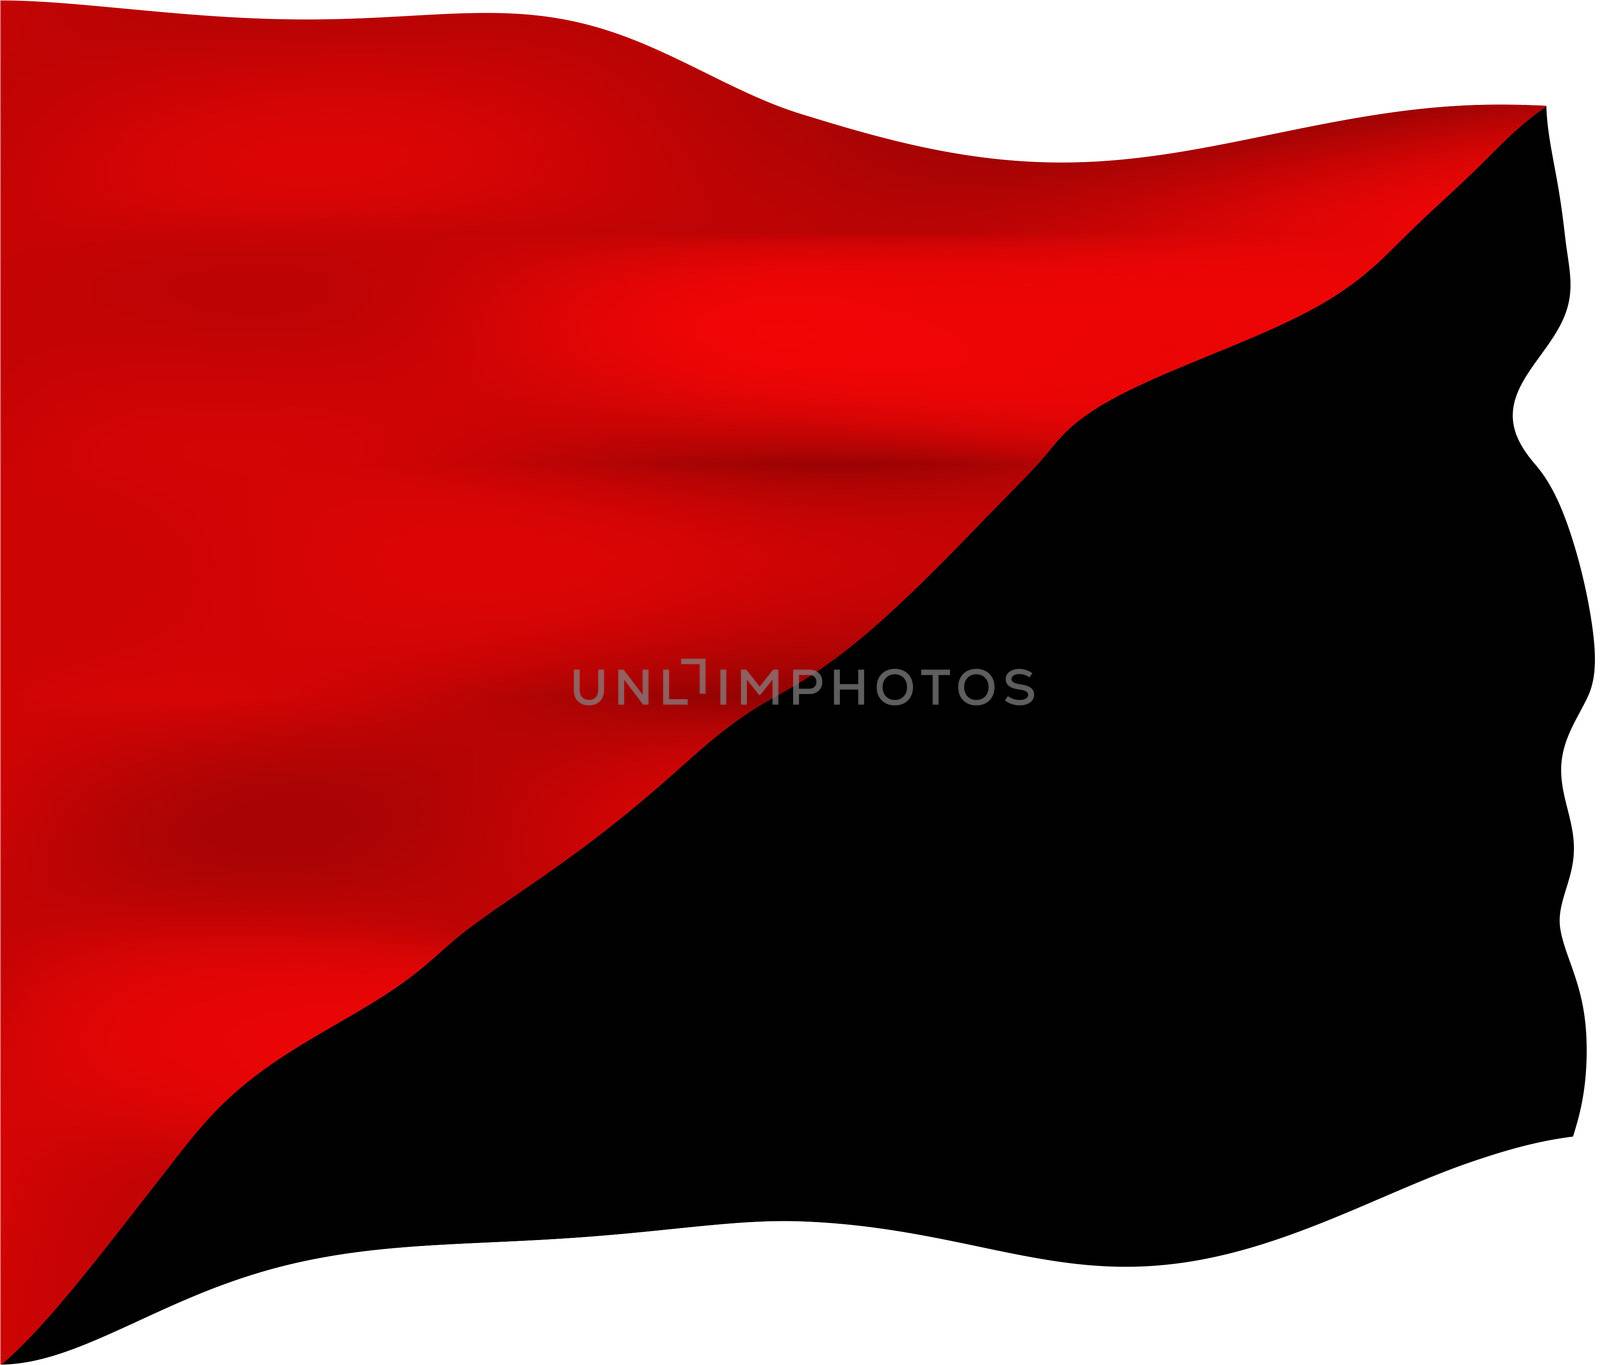 Red and black flag, symbol of the anarcho-syndicalist and anarcho-communist movements. Black is the traditional color of anarchism, and red is the traditional color of socialism.